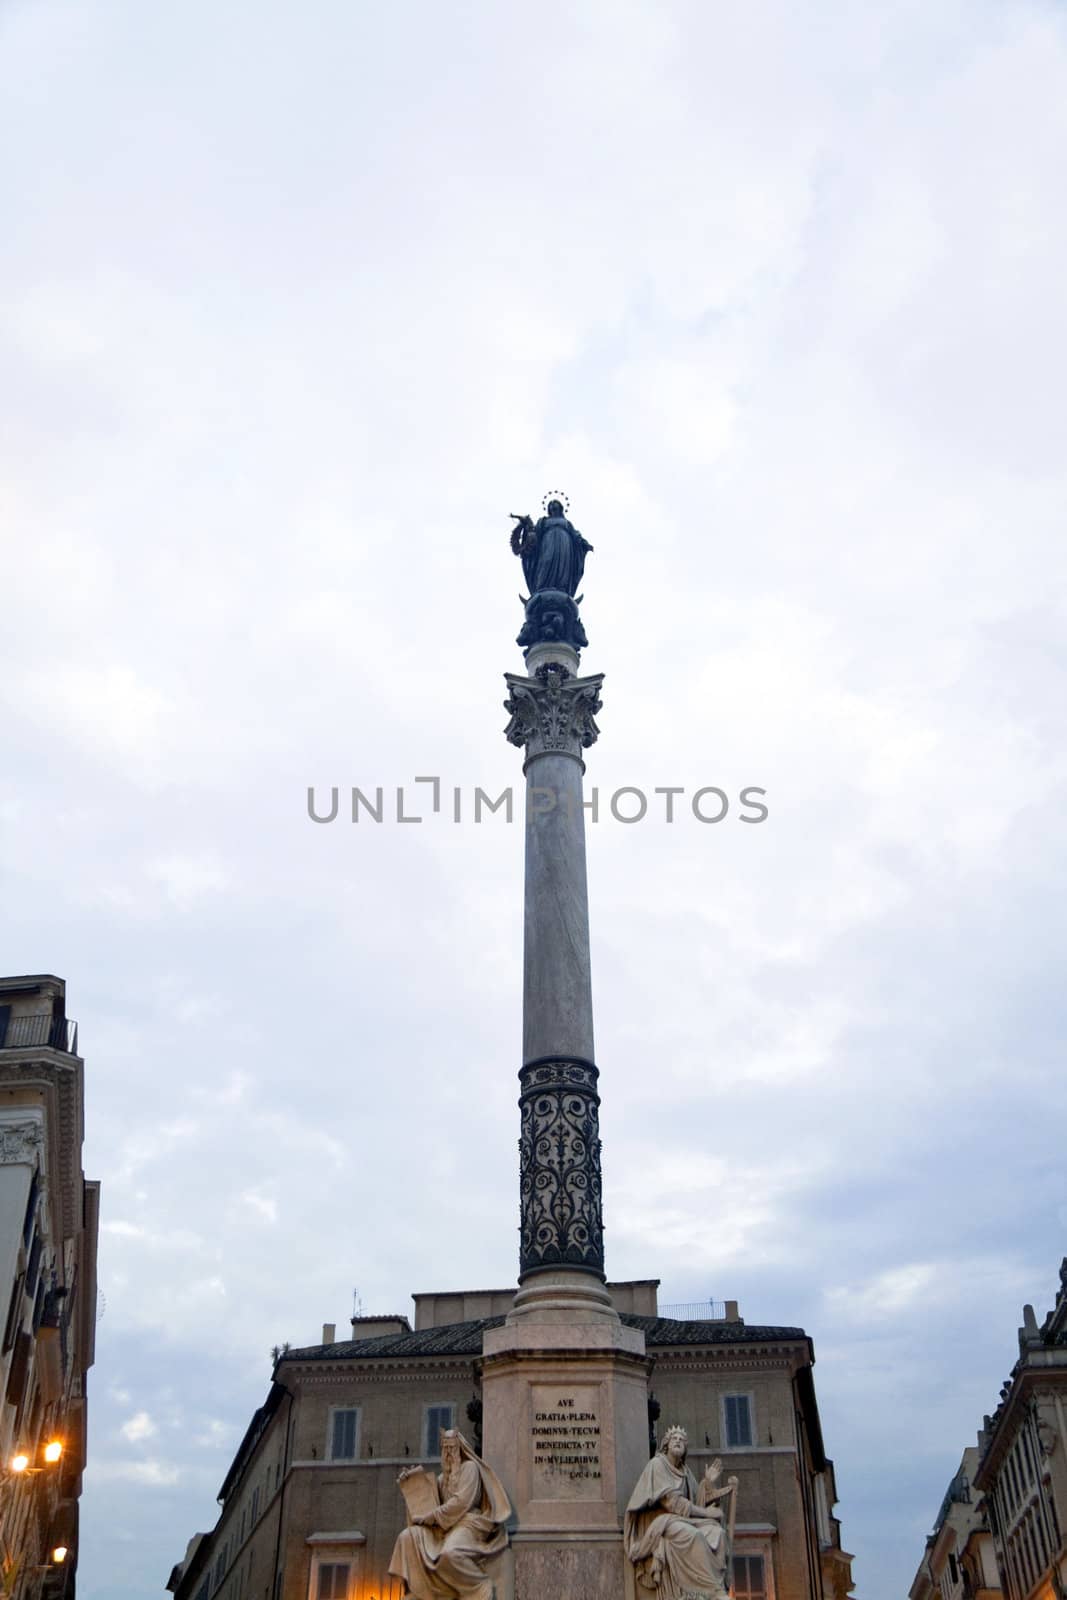 A tall religious obelisk in Rome, Italy